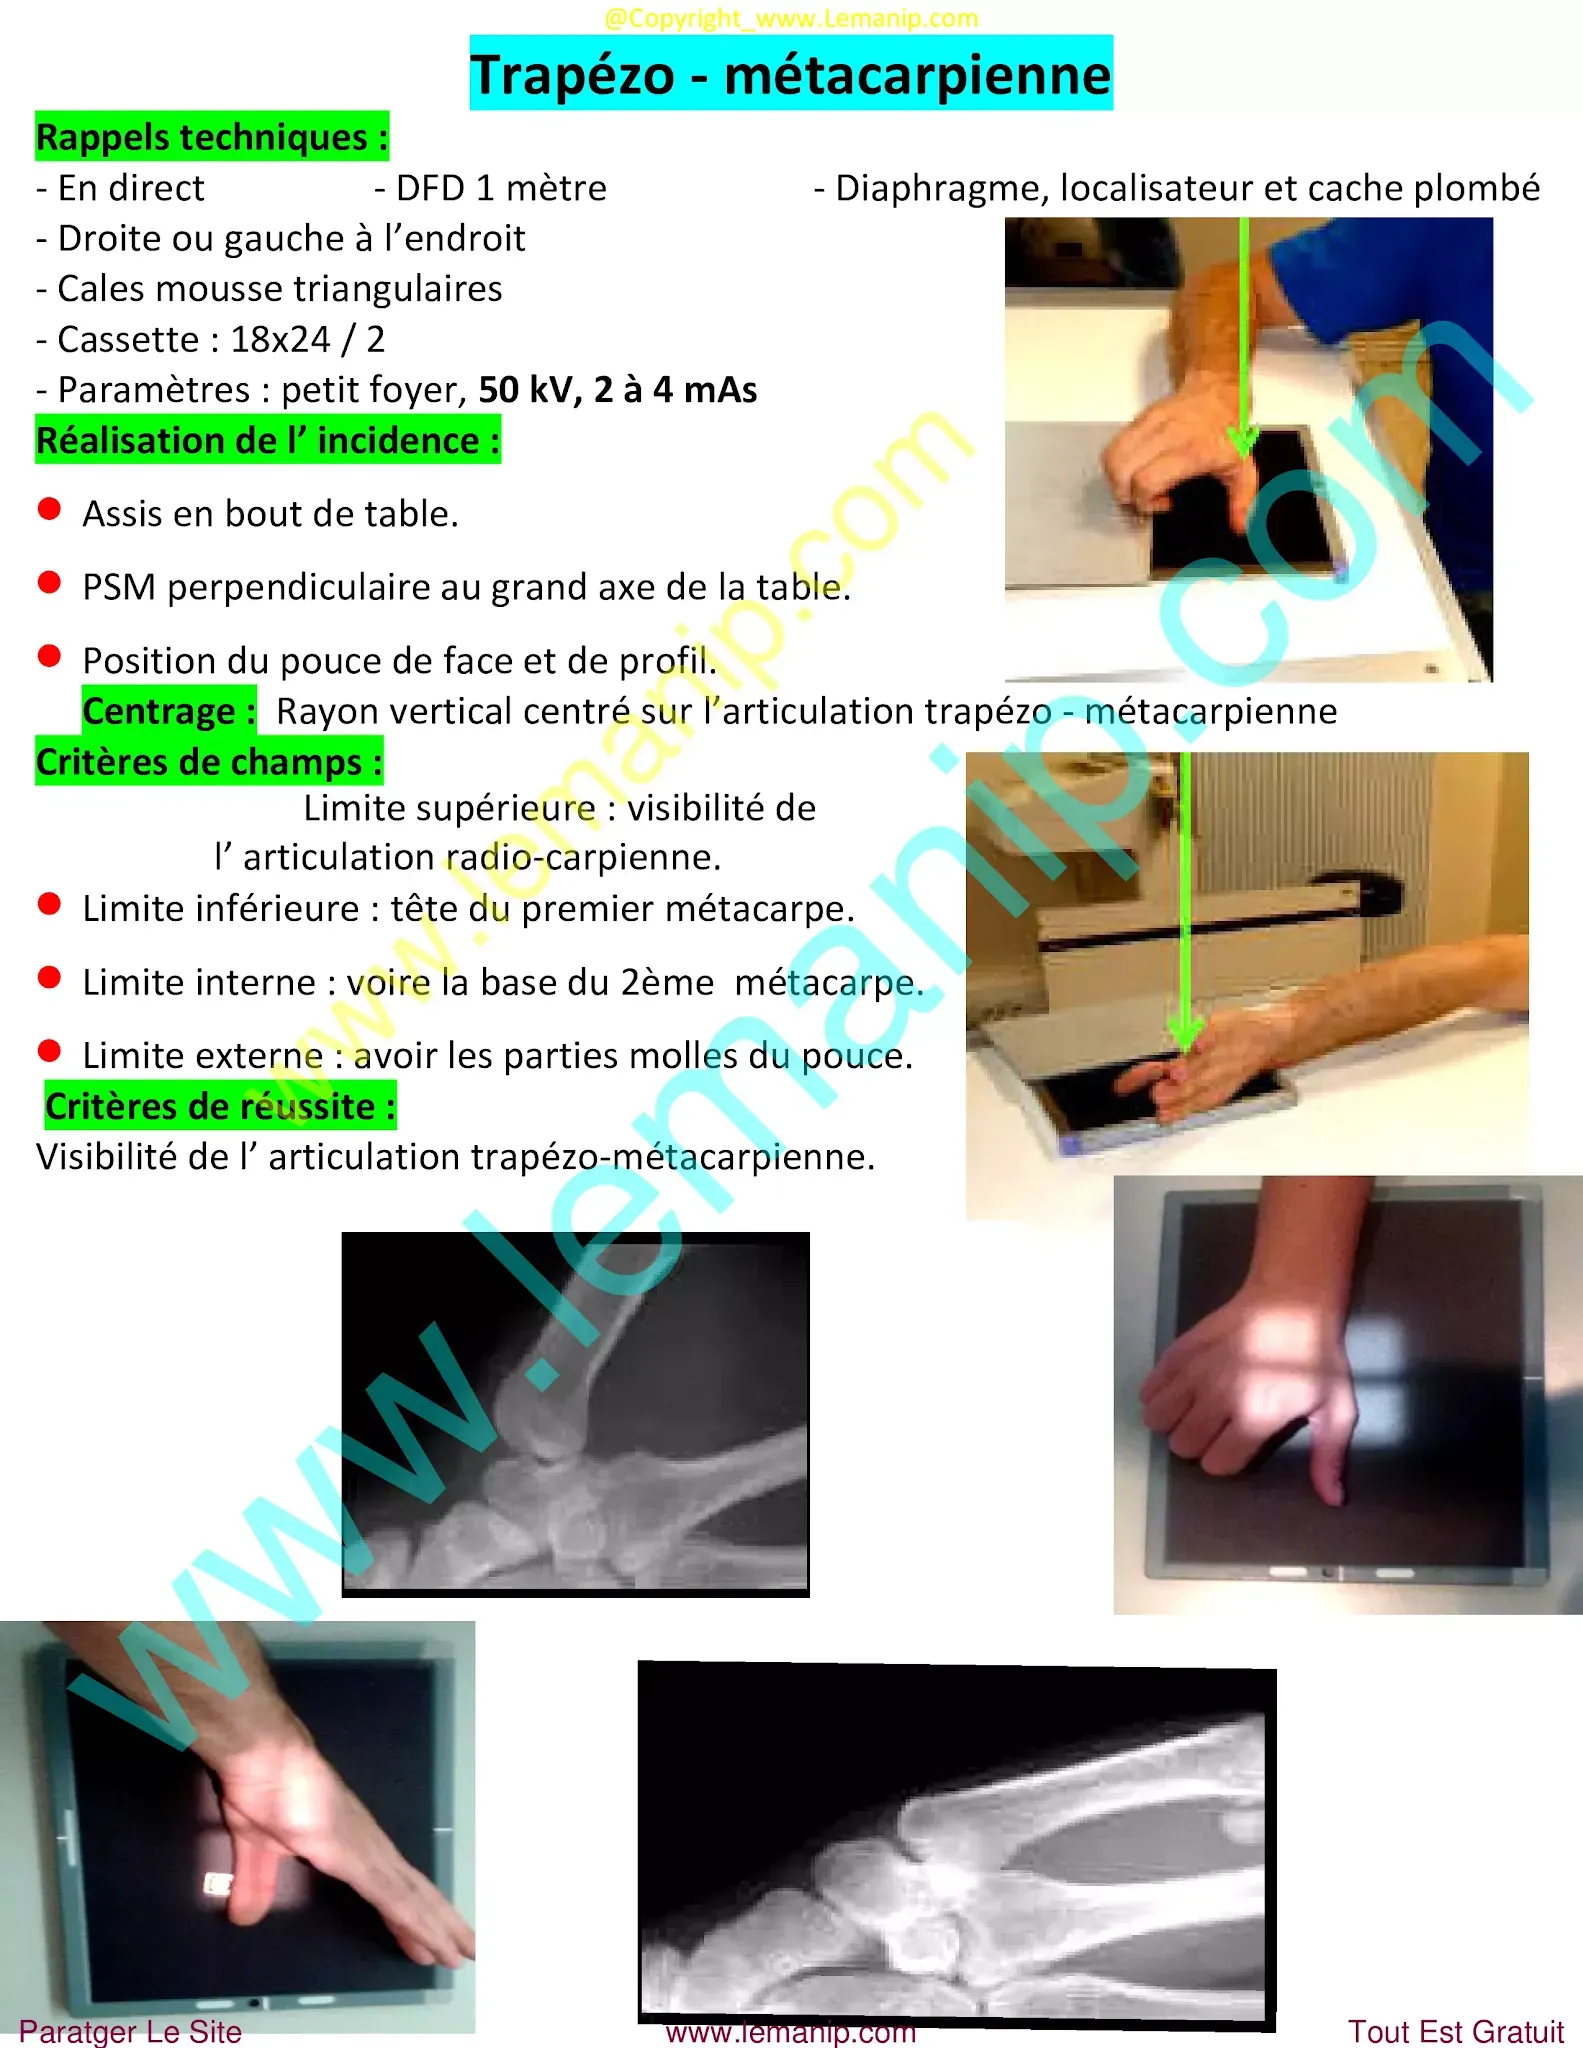 avant bras,elbow pain orthopedic doctor,dr henry hand and wrist,elbow pain treatment near me,premier orthopedics hand specialist,bras avant,hand man,orthopedic hand,orthopedic wrist,orthopedic elbow,orthopedic carpal tunnel